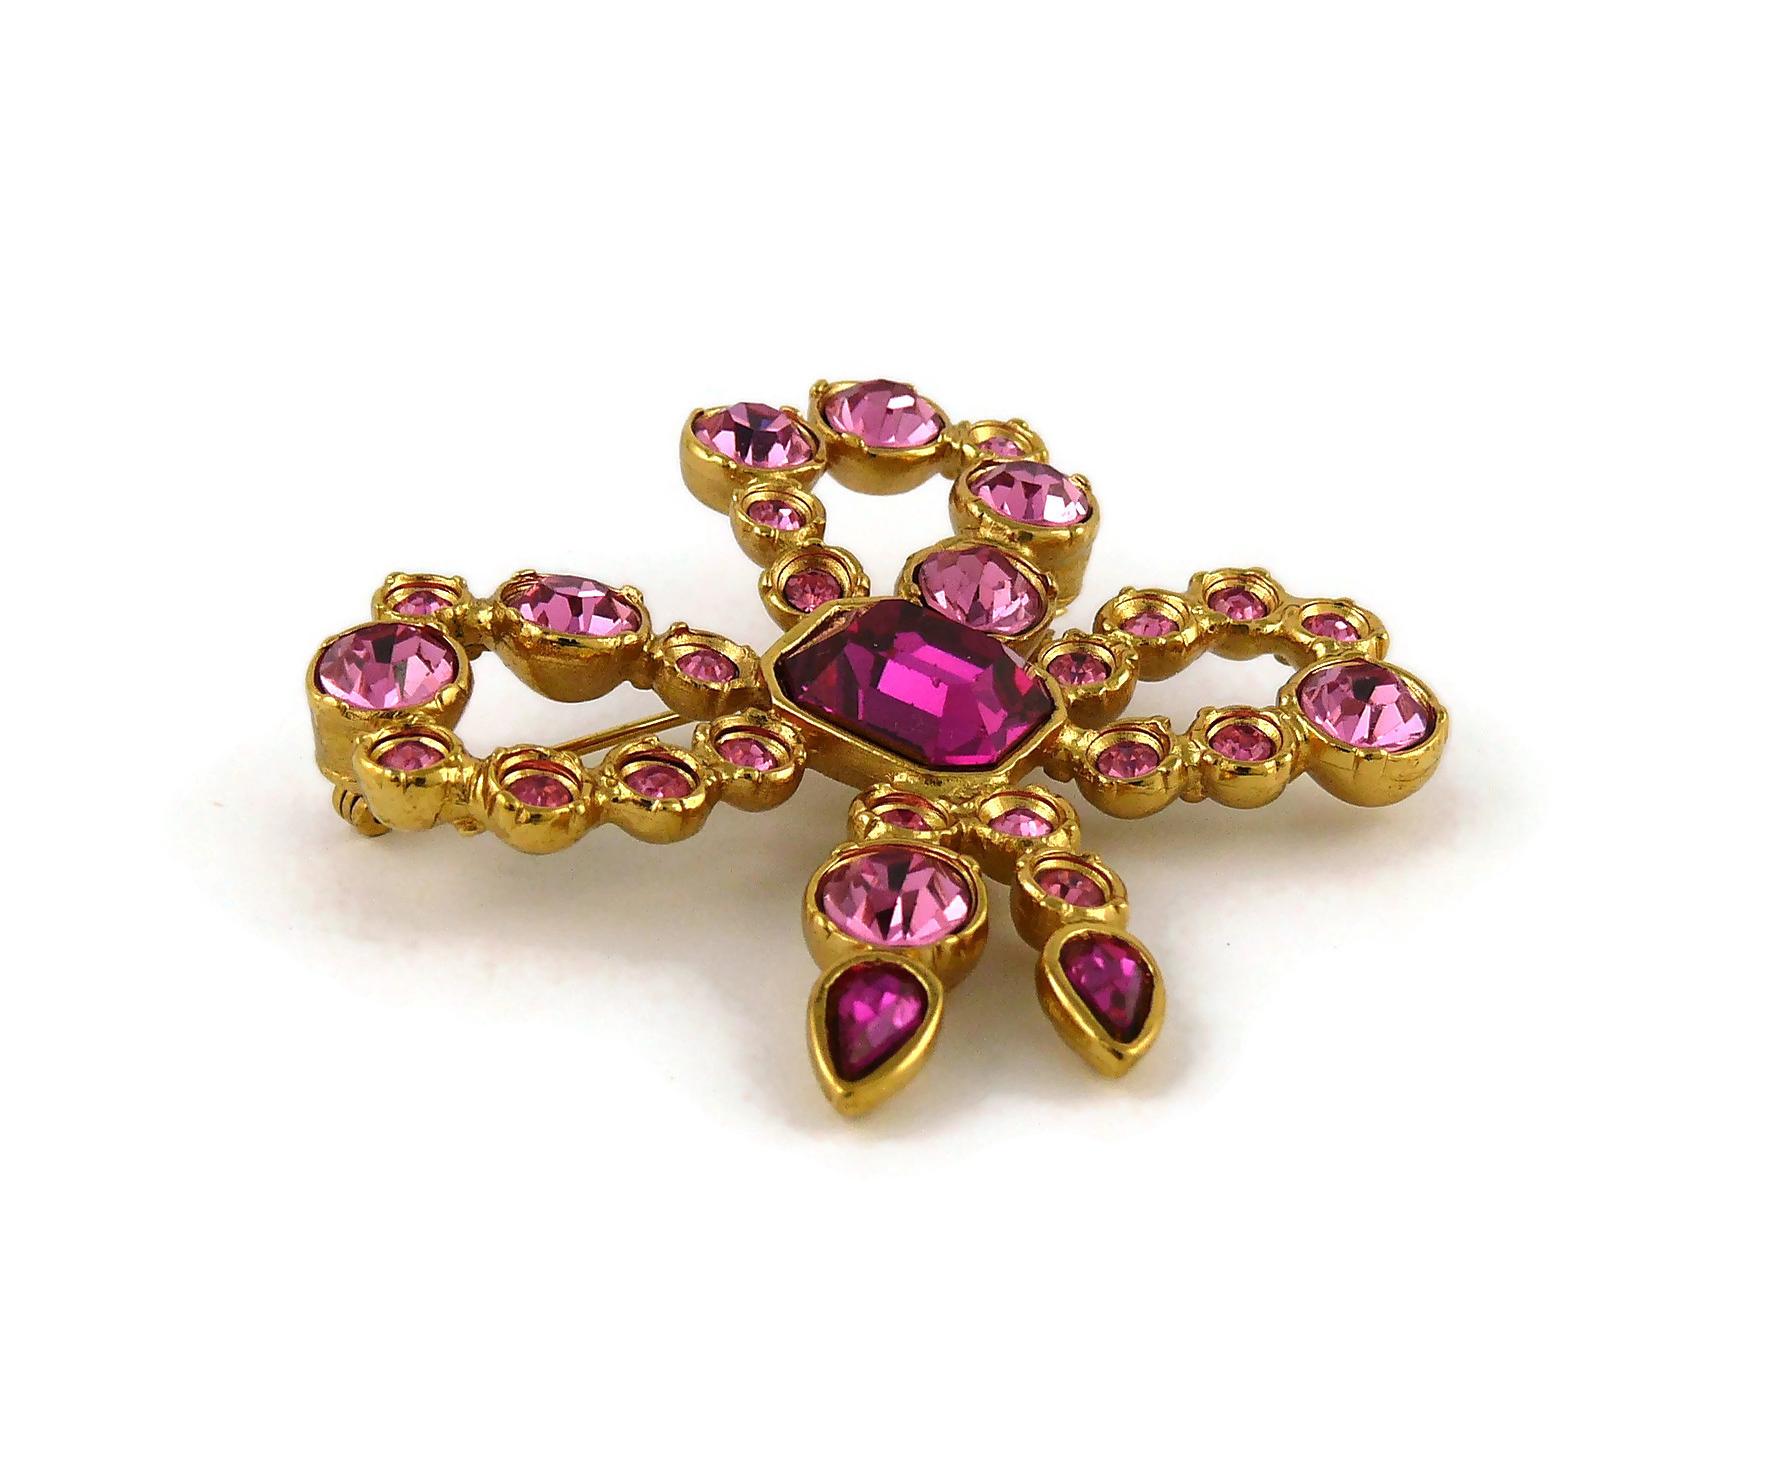 Yves Saint Laurent YSL Vintage Jeweled Bow Brooch For Sale 1